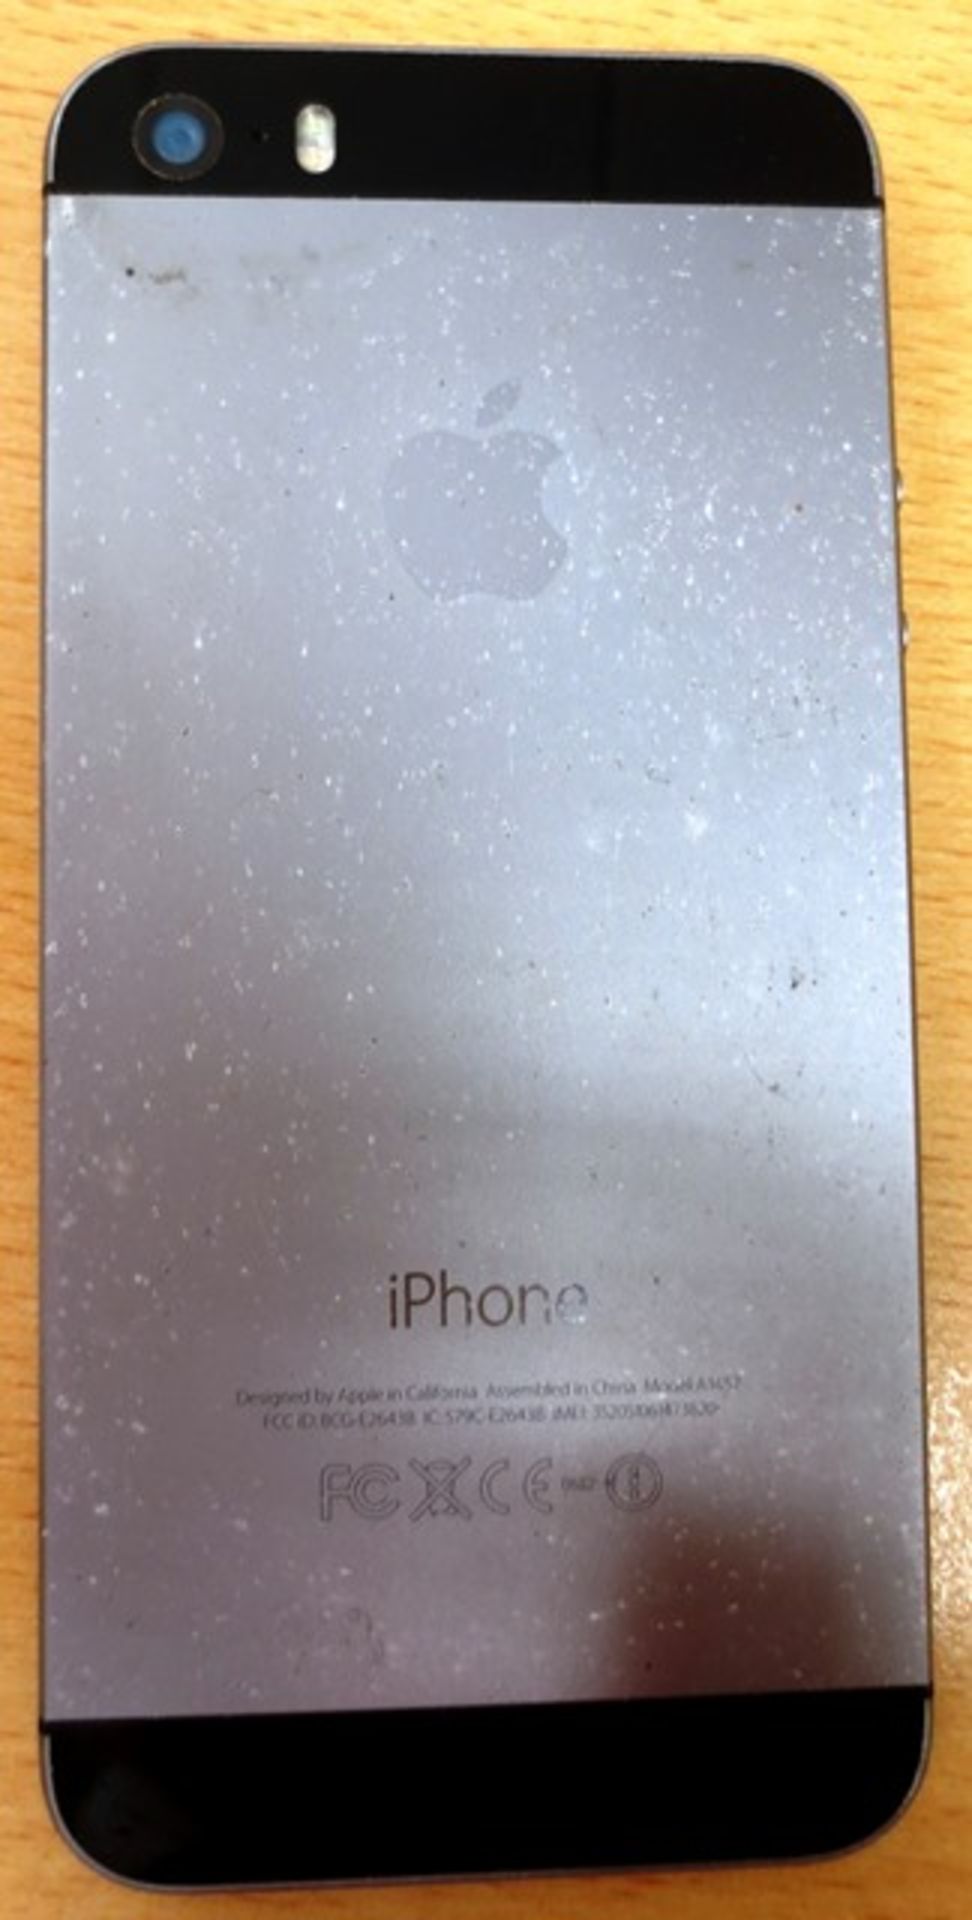 Apple iPhone 5s, 16GB. Model A1457. Previous Network Vodafone. Black & Silver (Please note: No char - Image 2 of 2